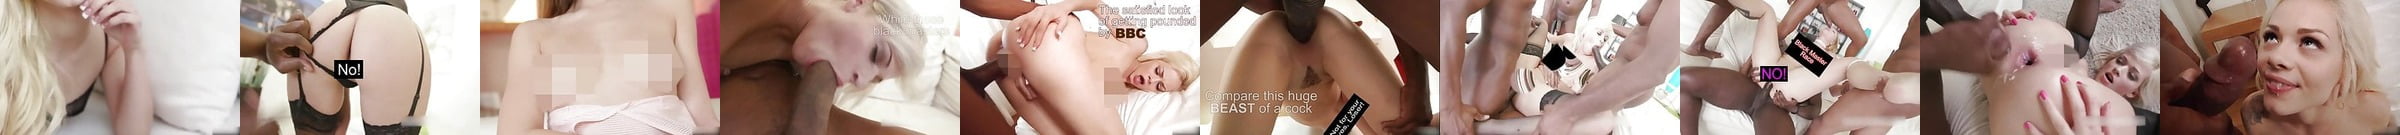 Censored Interracial Anal Pornmisicvideo Porn 67 Xhamster